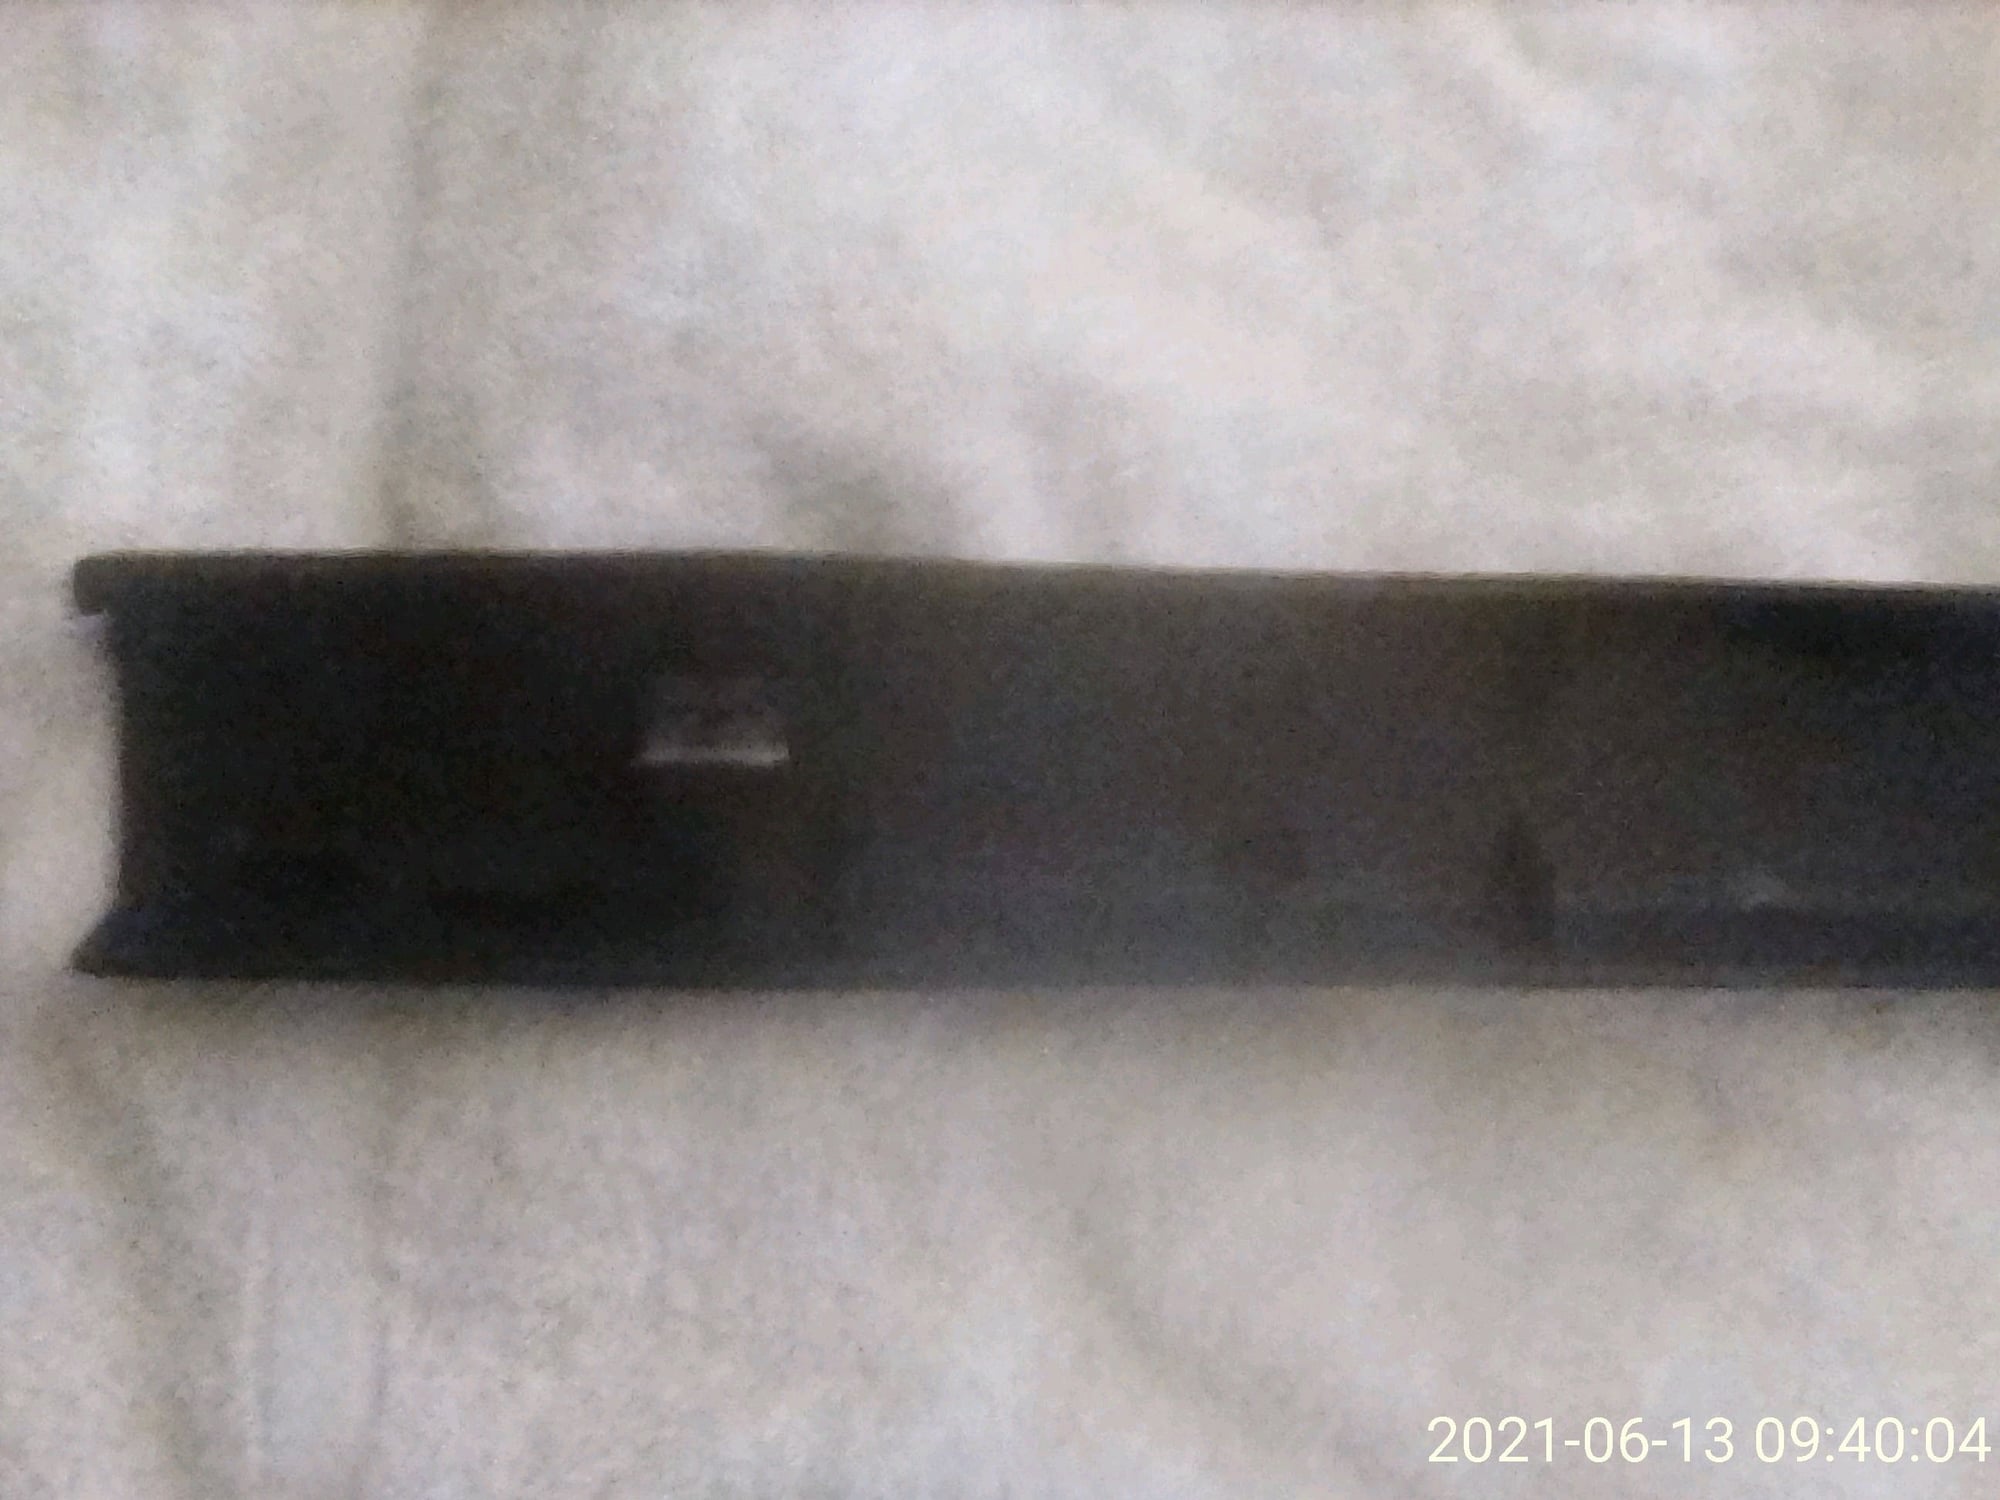 Interior/Upholstery - FD OEM Driver Side Door Sill - Used - 1993 to 1995 Mazda RX-7 - San Jose, CA 95121, United States